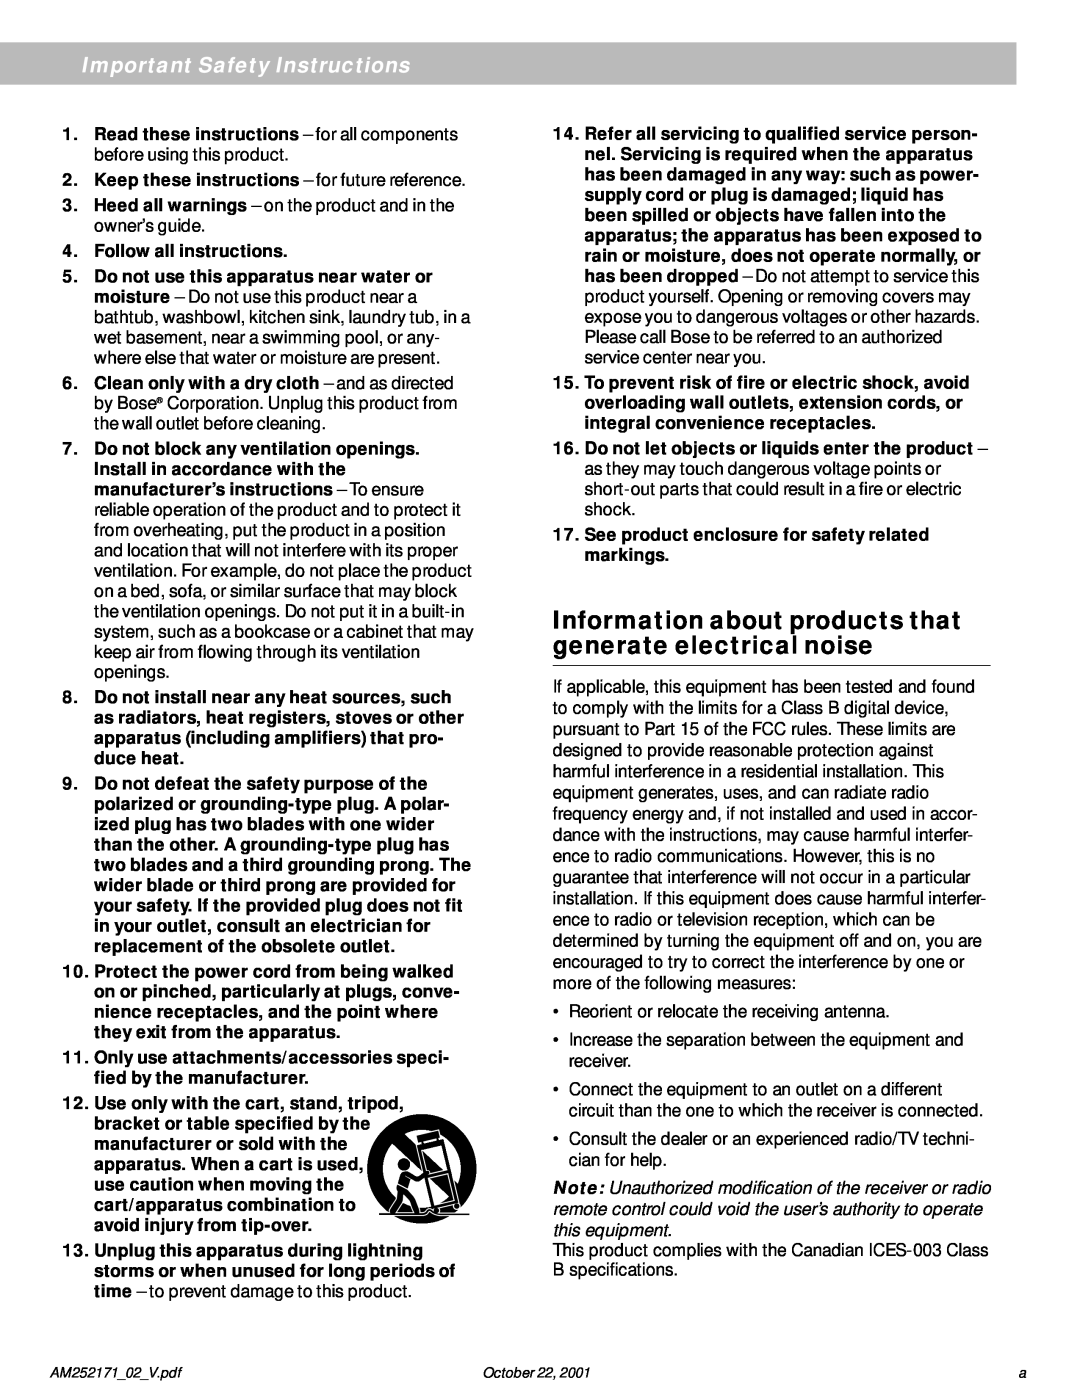 Bose 3 Series manual Information about products that generate electrical noise, Important Safety Instructions 